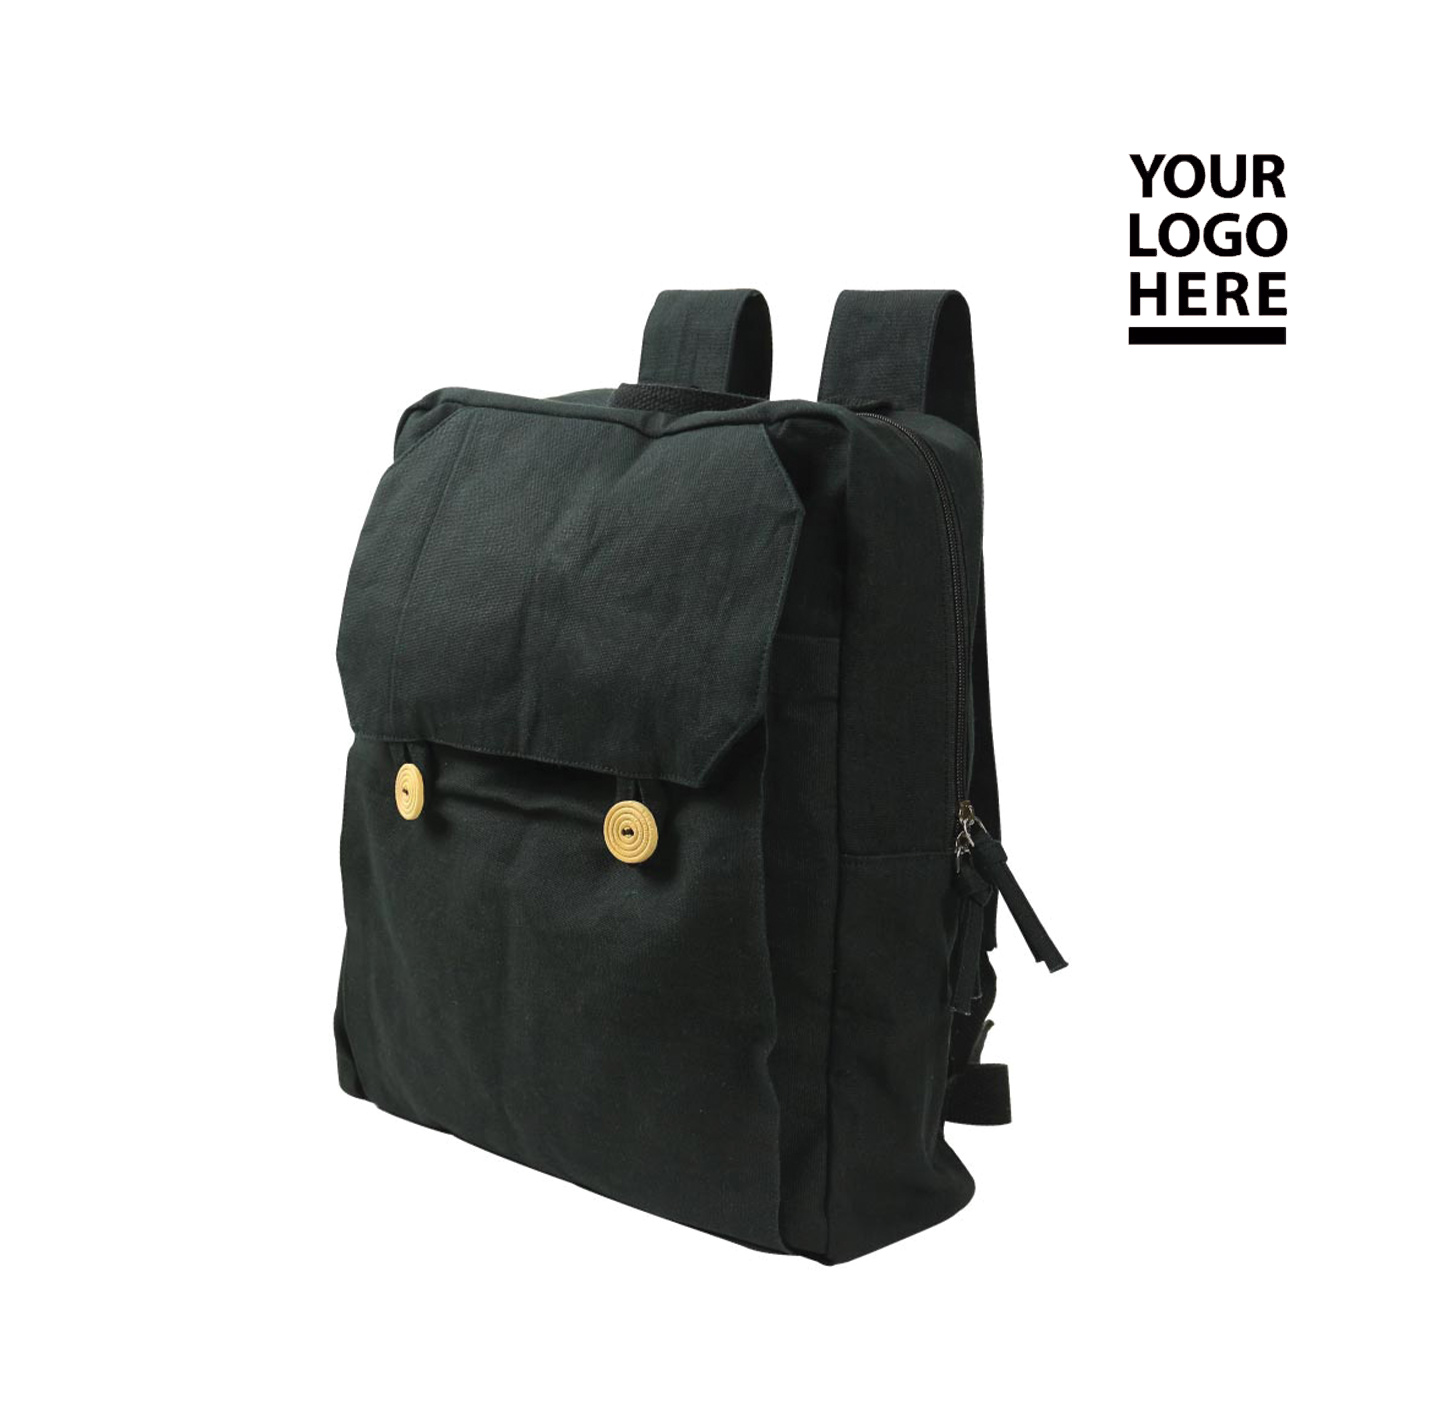 Black Cotton Backpack with Zipper Closure